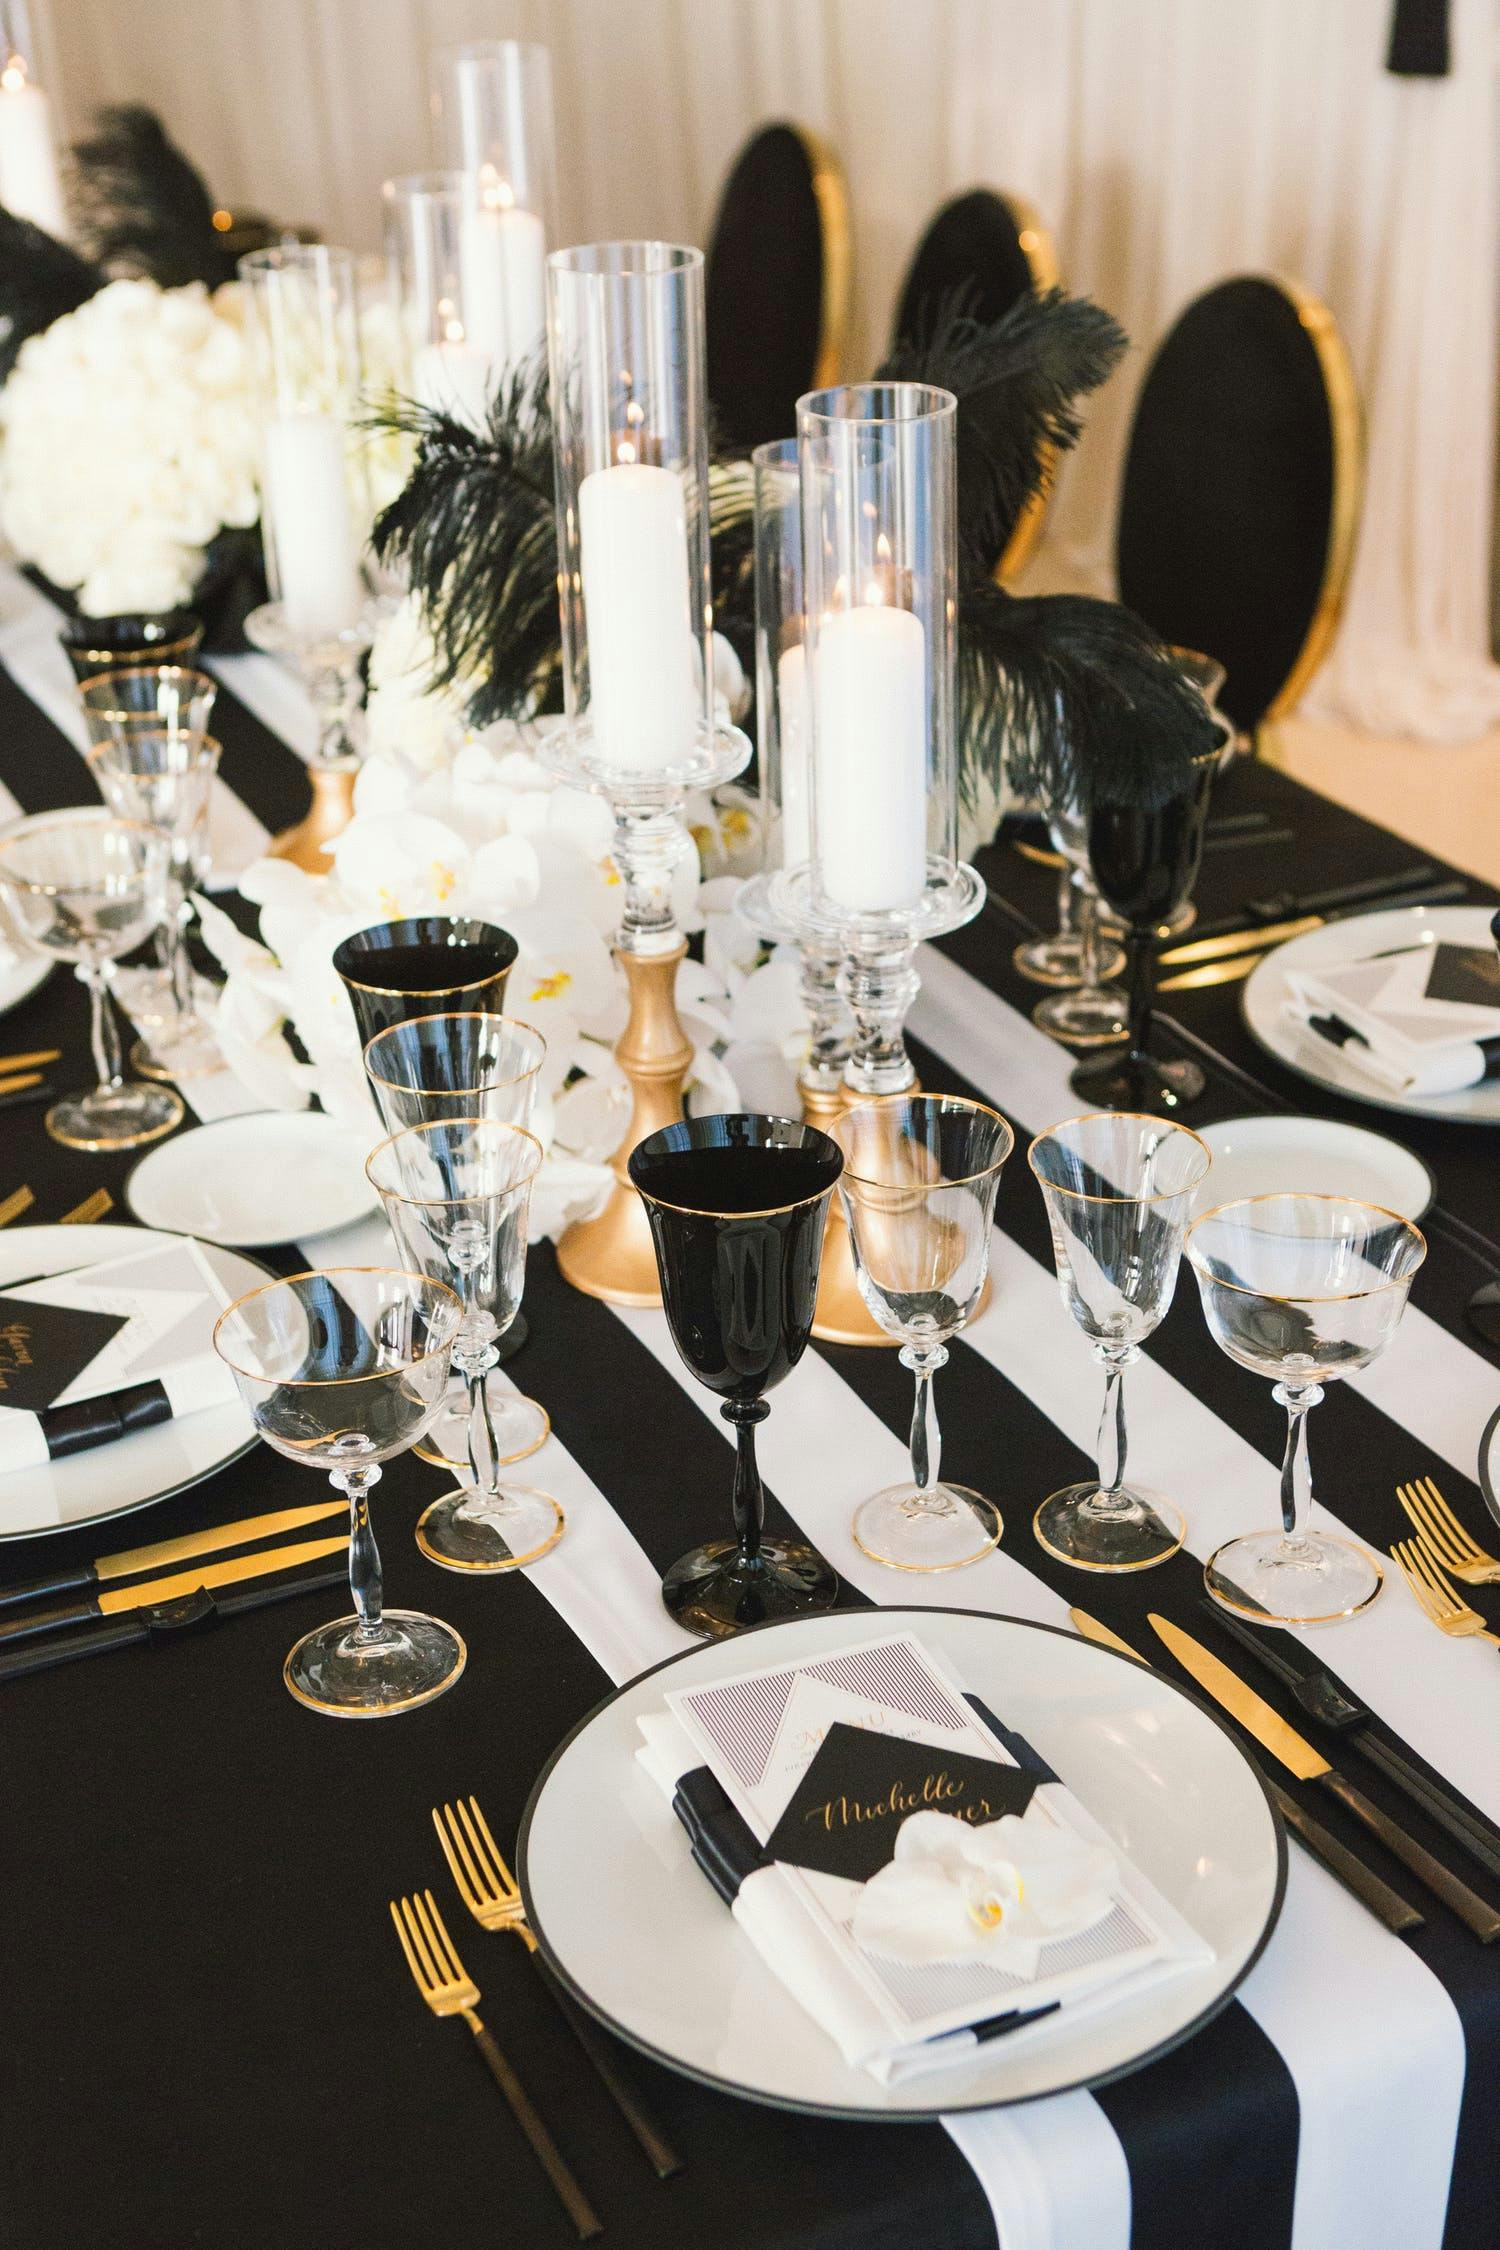 Great Gatsby-Themed Wedding Tablescape With Black, White, and Gold Décor | PartySlate